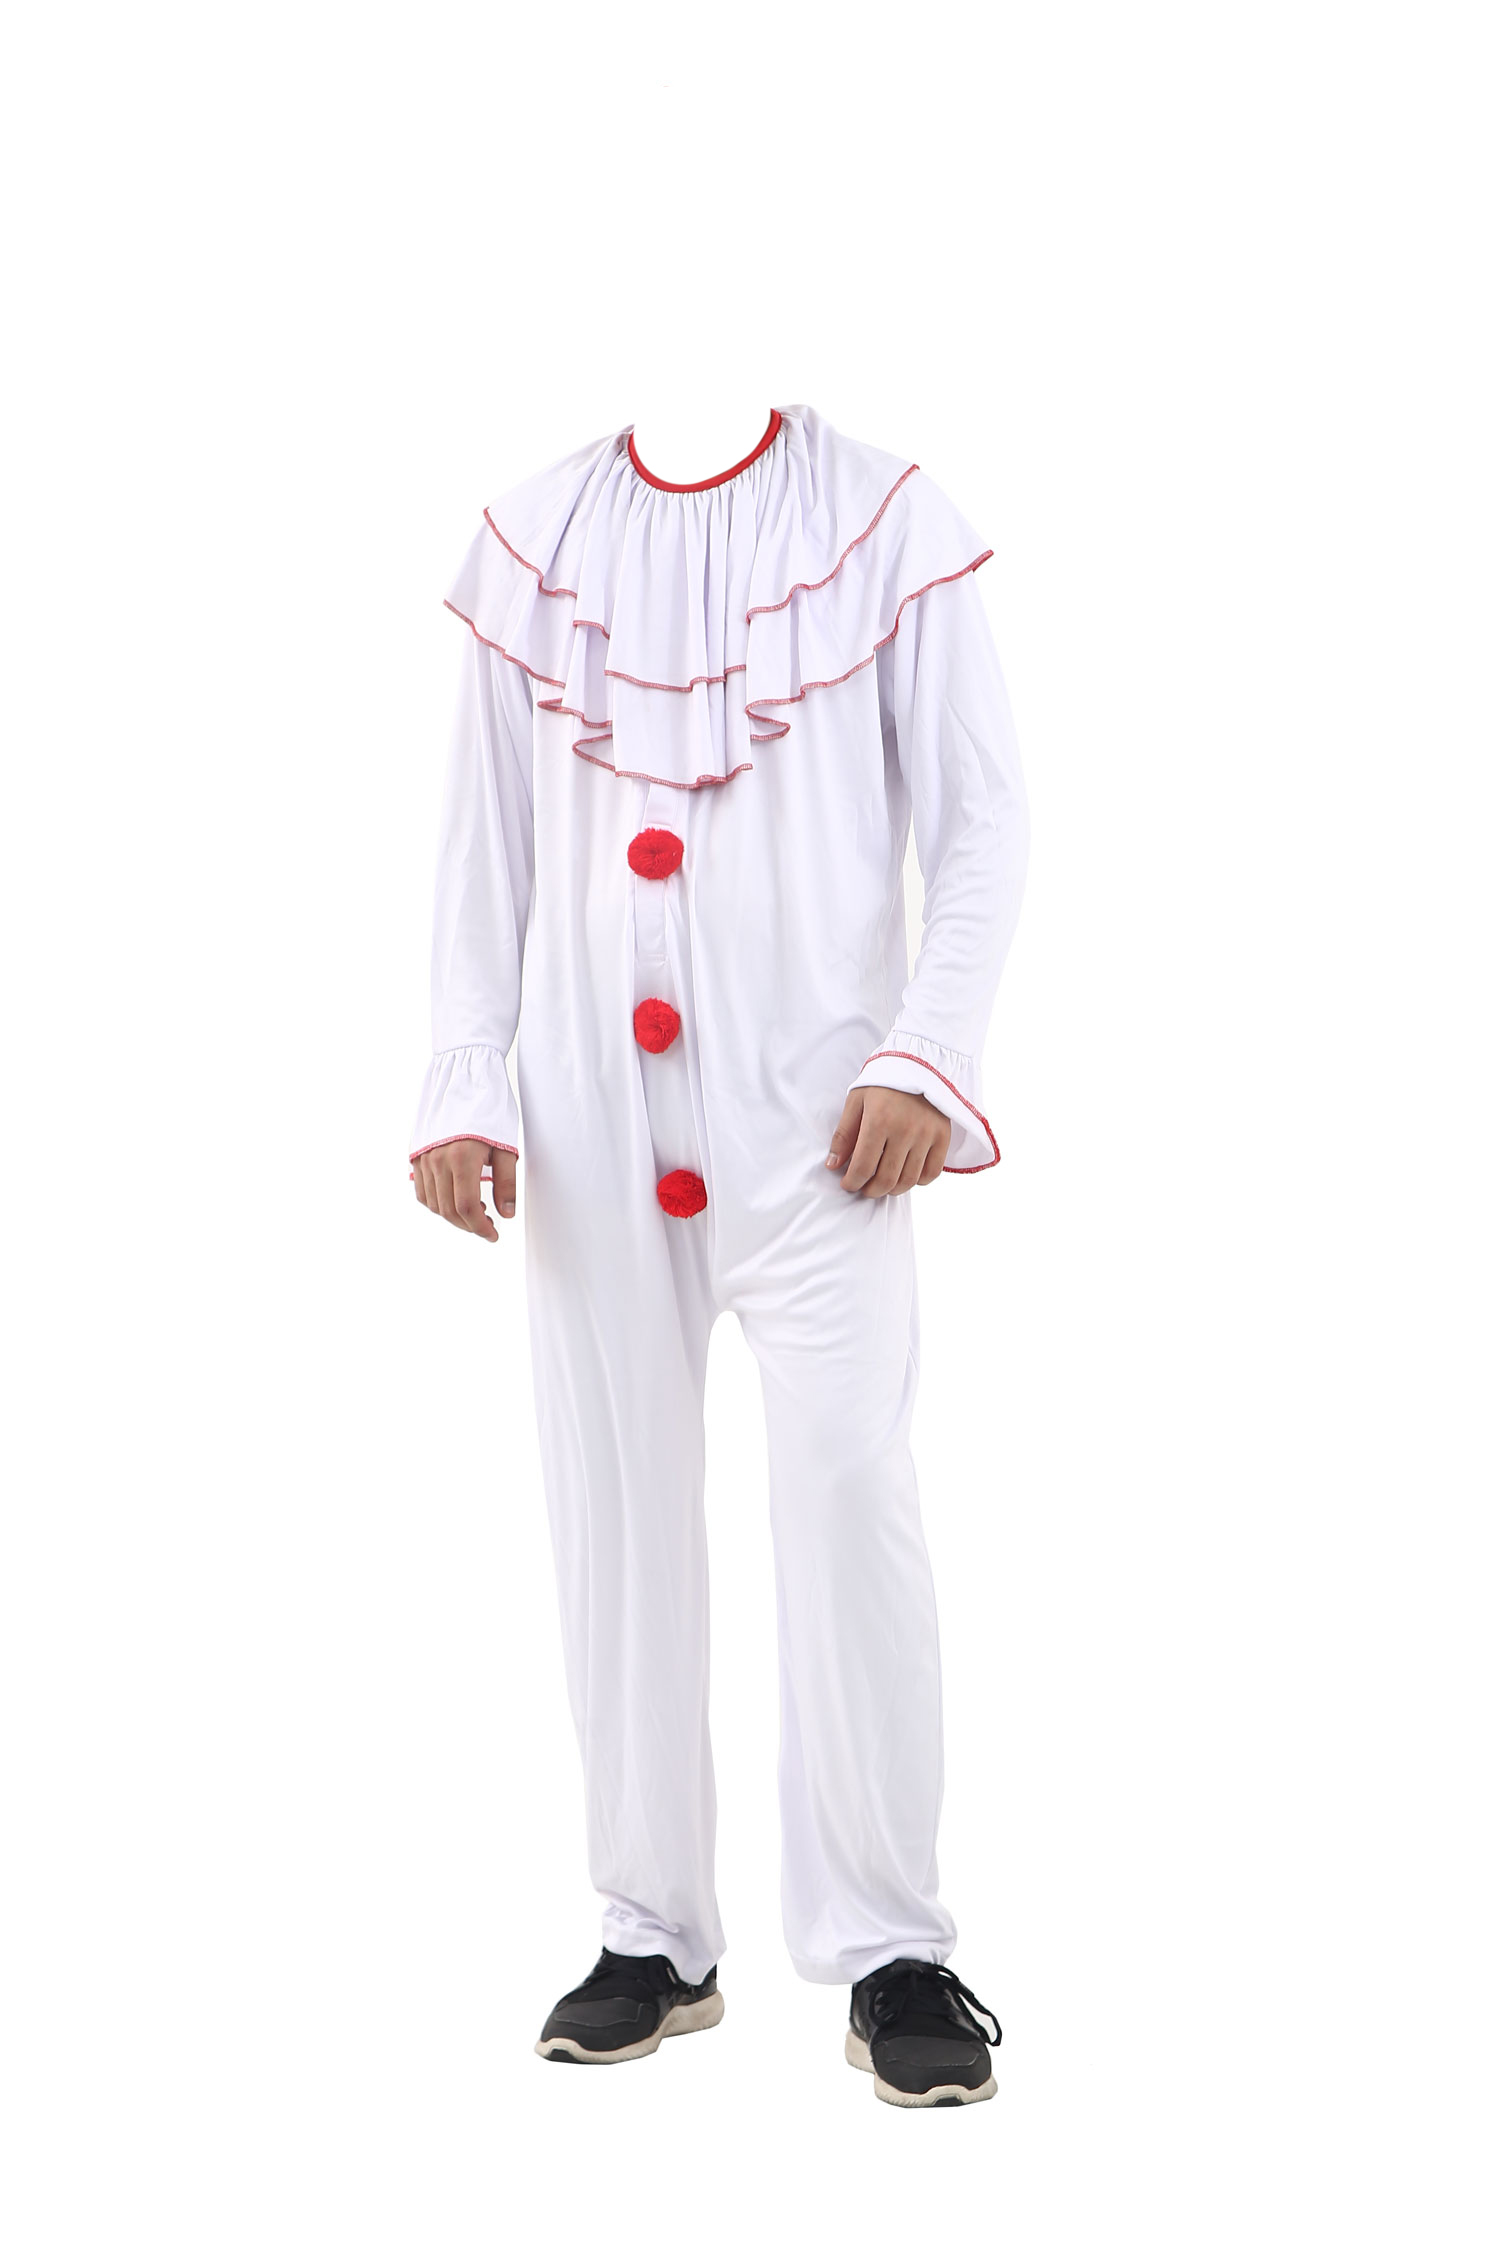 Adult Scary Clown Costume 